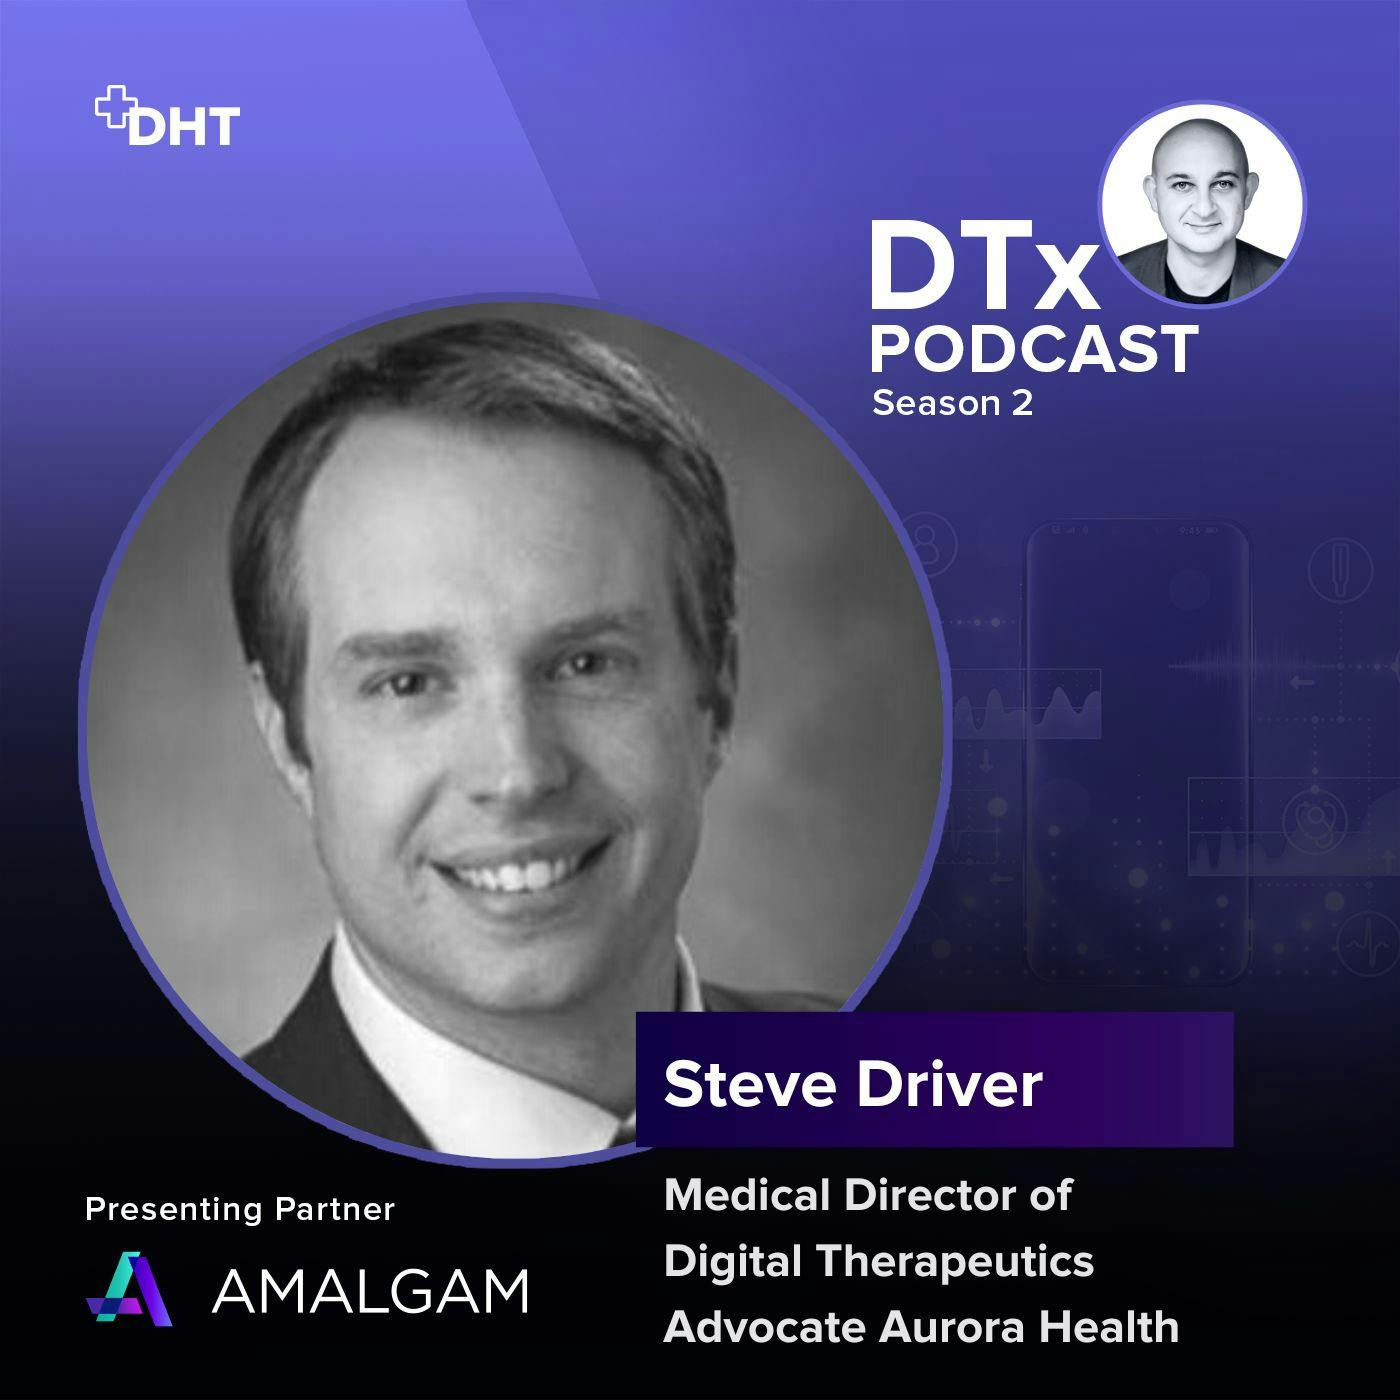 The Health System View of DTx: Steve Driver shares Insights on his Experience as a Medical Director of Digital Therapeutics